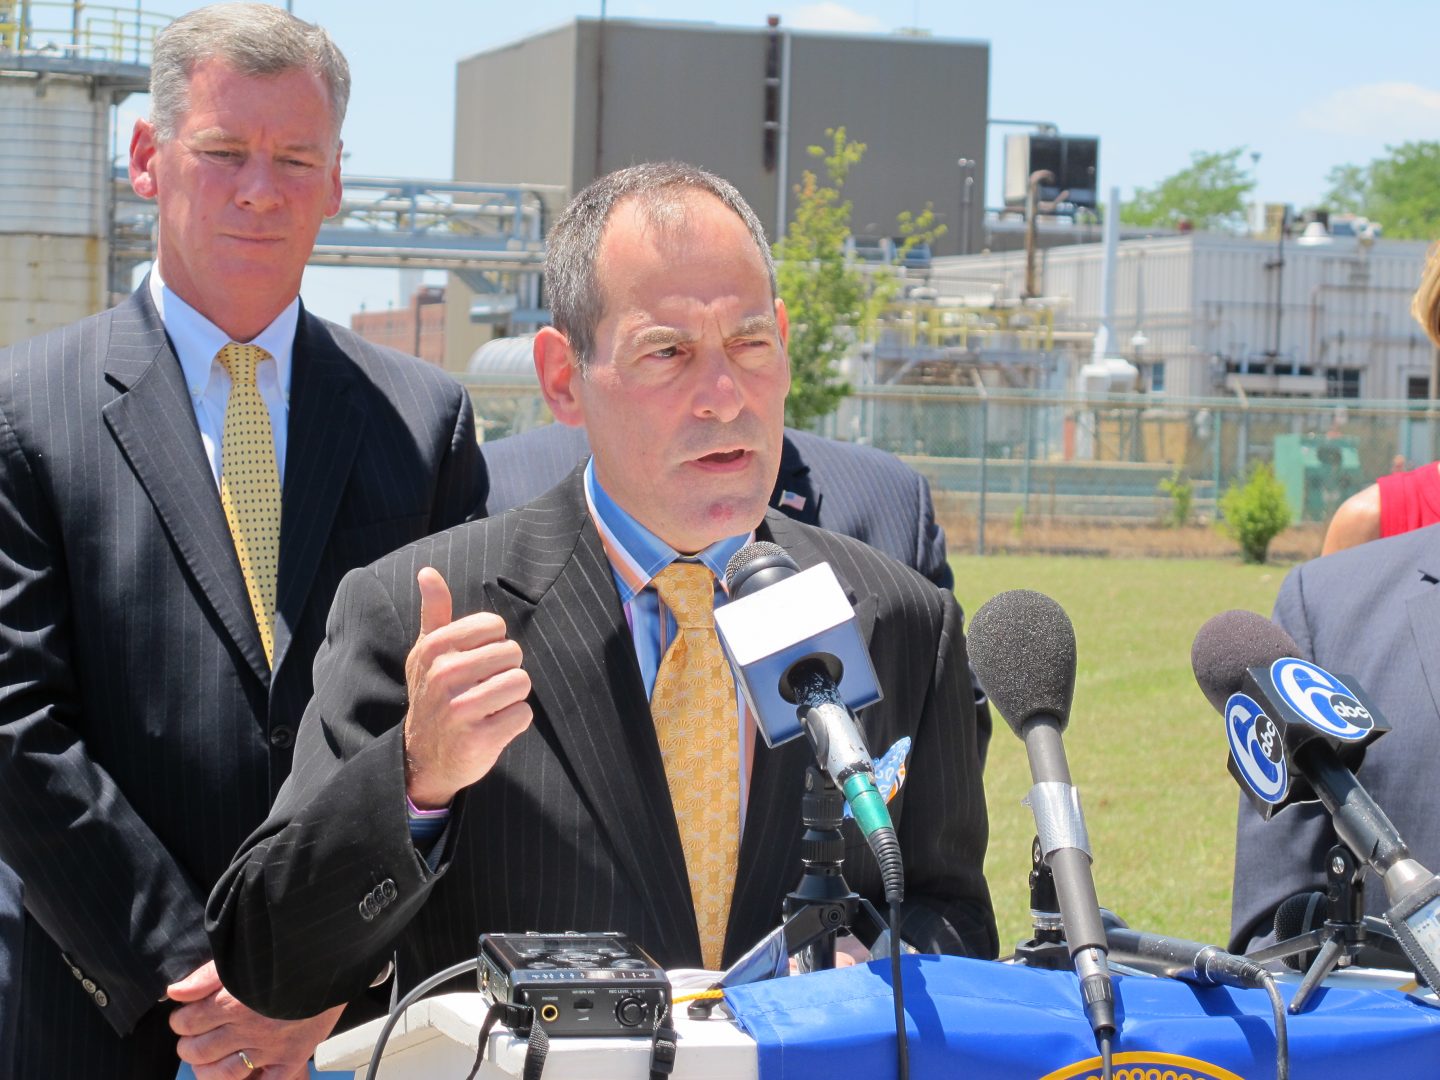 Department of Environmental Protection Secretary Michael Krancer at a press conference in Marcus Hook detailing the results of the IHS study on refinery re-use.